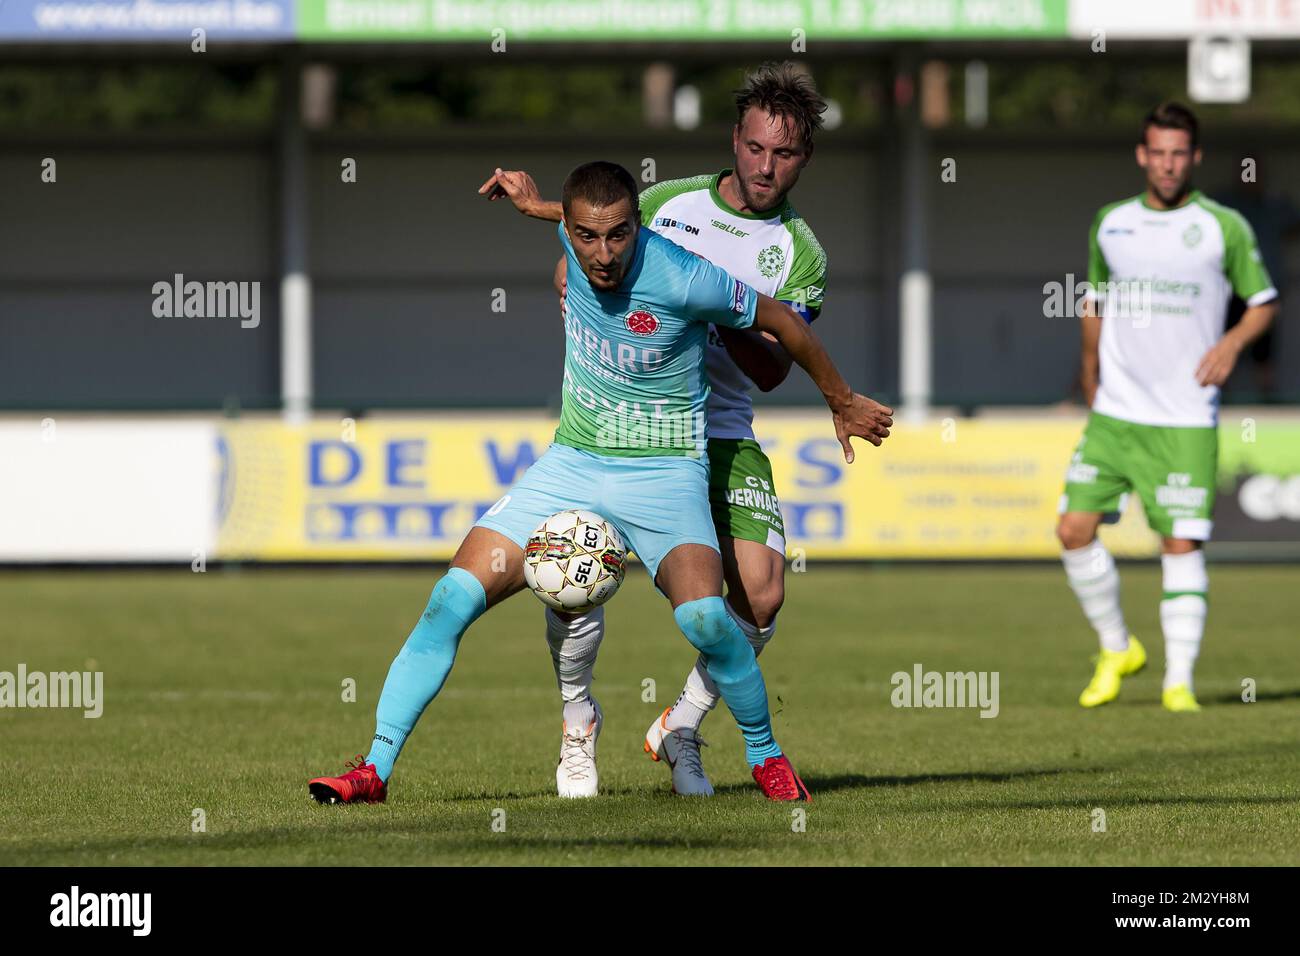 Virton's Mehdi Lazaar and Dessel's Kevin Janssens fight for the ball during a soccer game between Dessel Sport (First amateur division) and Royal Excelsior Virton (1b 2nd division), Saturday 24 August 2019 in Dessel, in the fifth round of the 'Croky Cup' Belgian cup. BELGA PHOTO KRISTOF VAN ACCOM Stock Photo